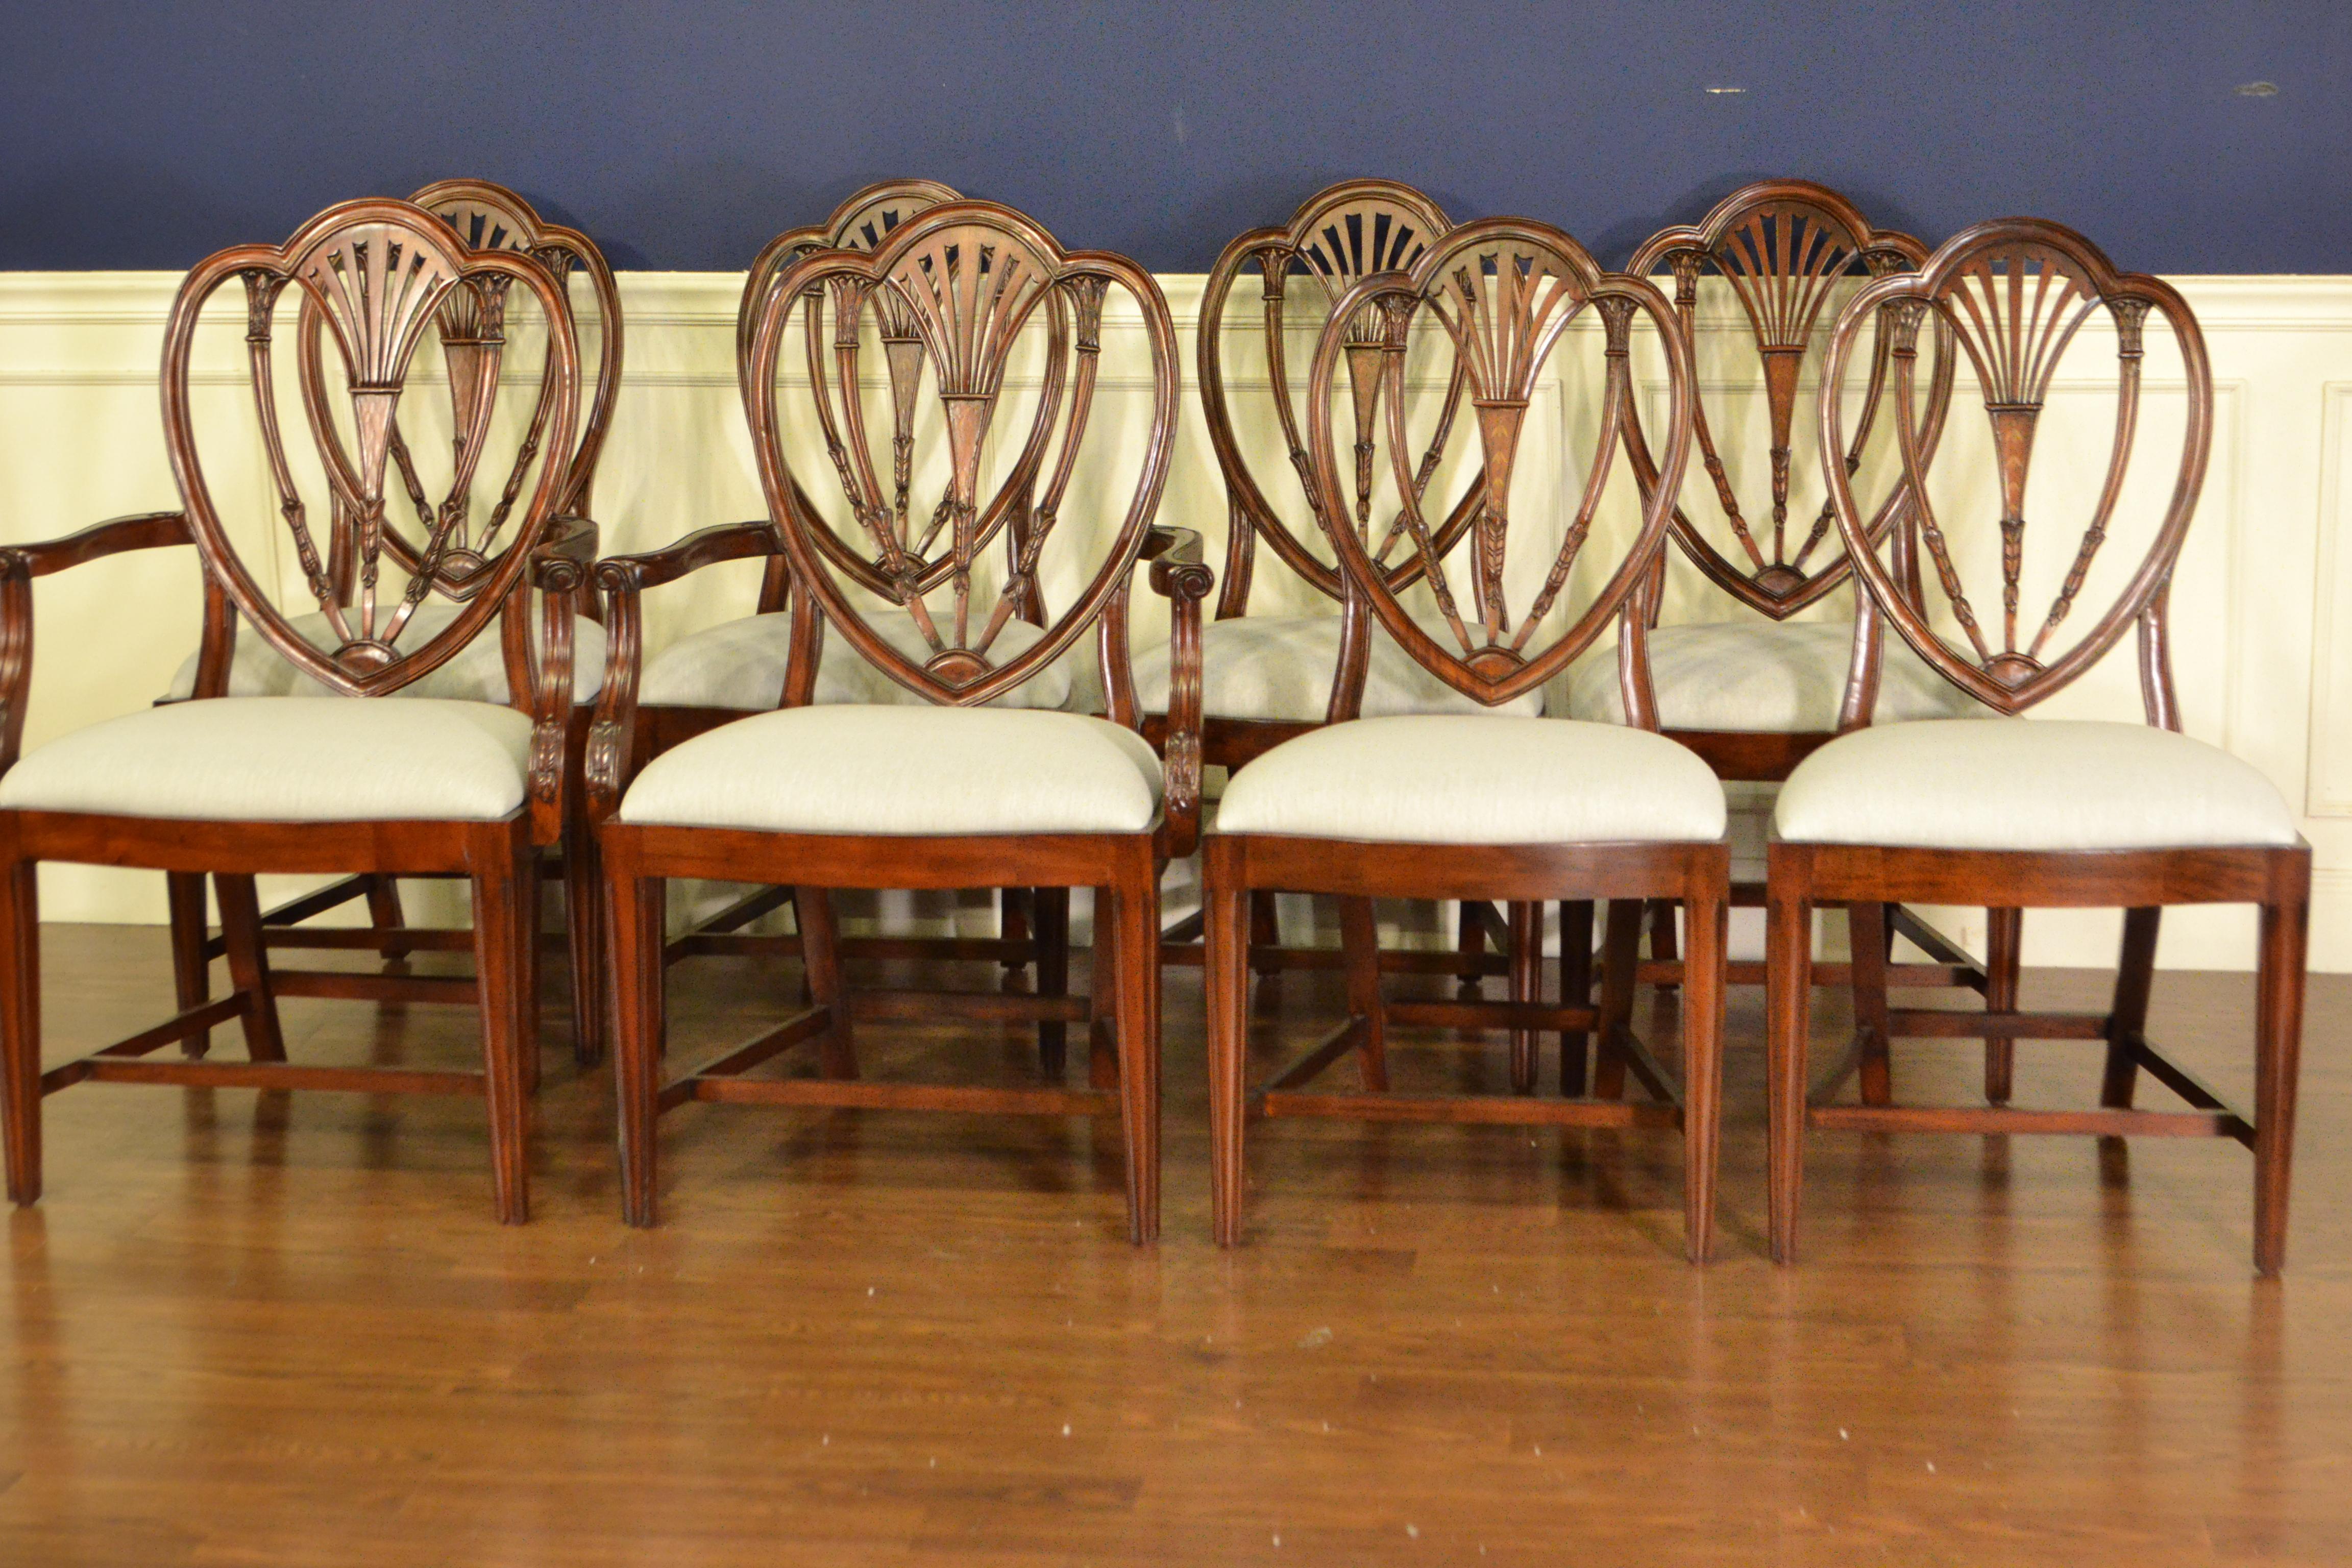 These are new traditional mahogany dining chairs. Their design was inspired by the Hepplewhite Dining chairs from the regency period. They feature Classic Hepplewhite styling with shieldbacks and fluted tapered legs. They feature understated